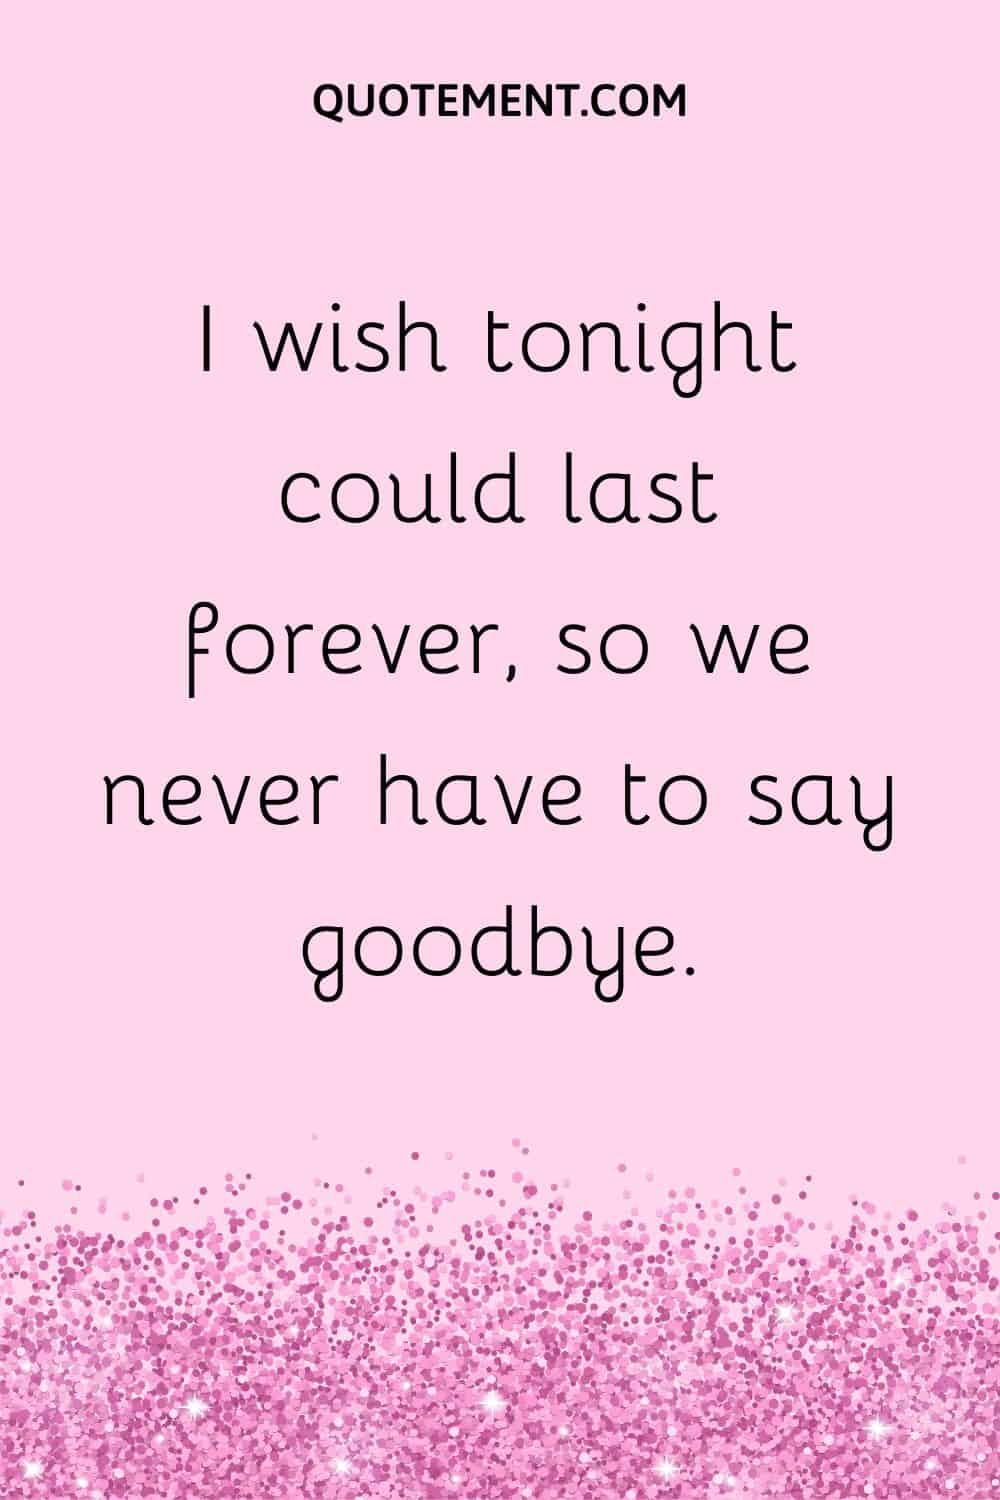 I wish tonight could last forever